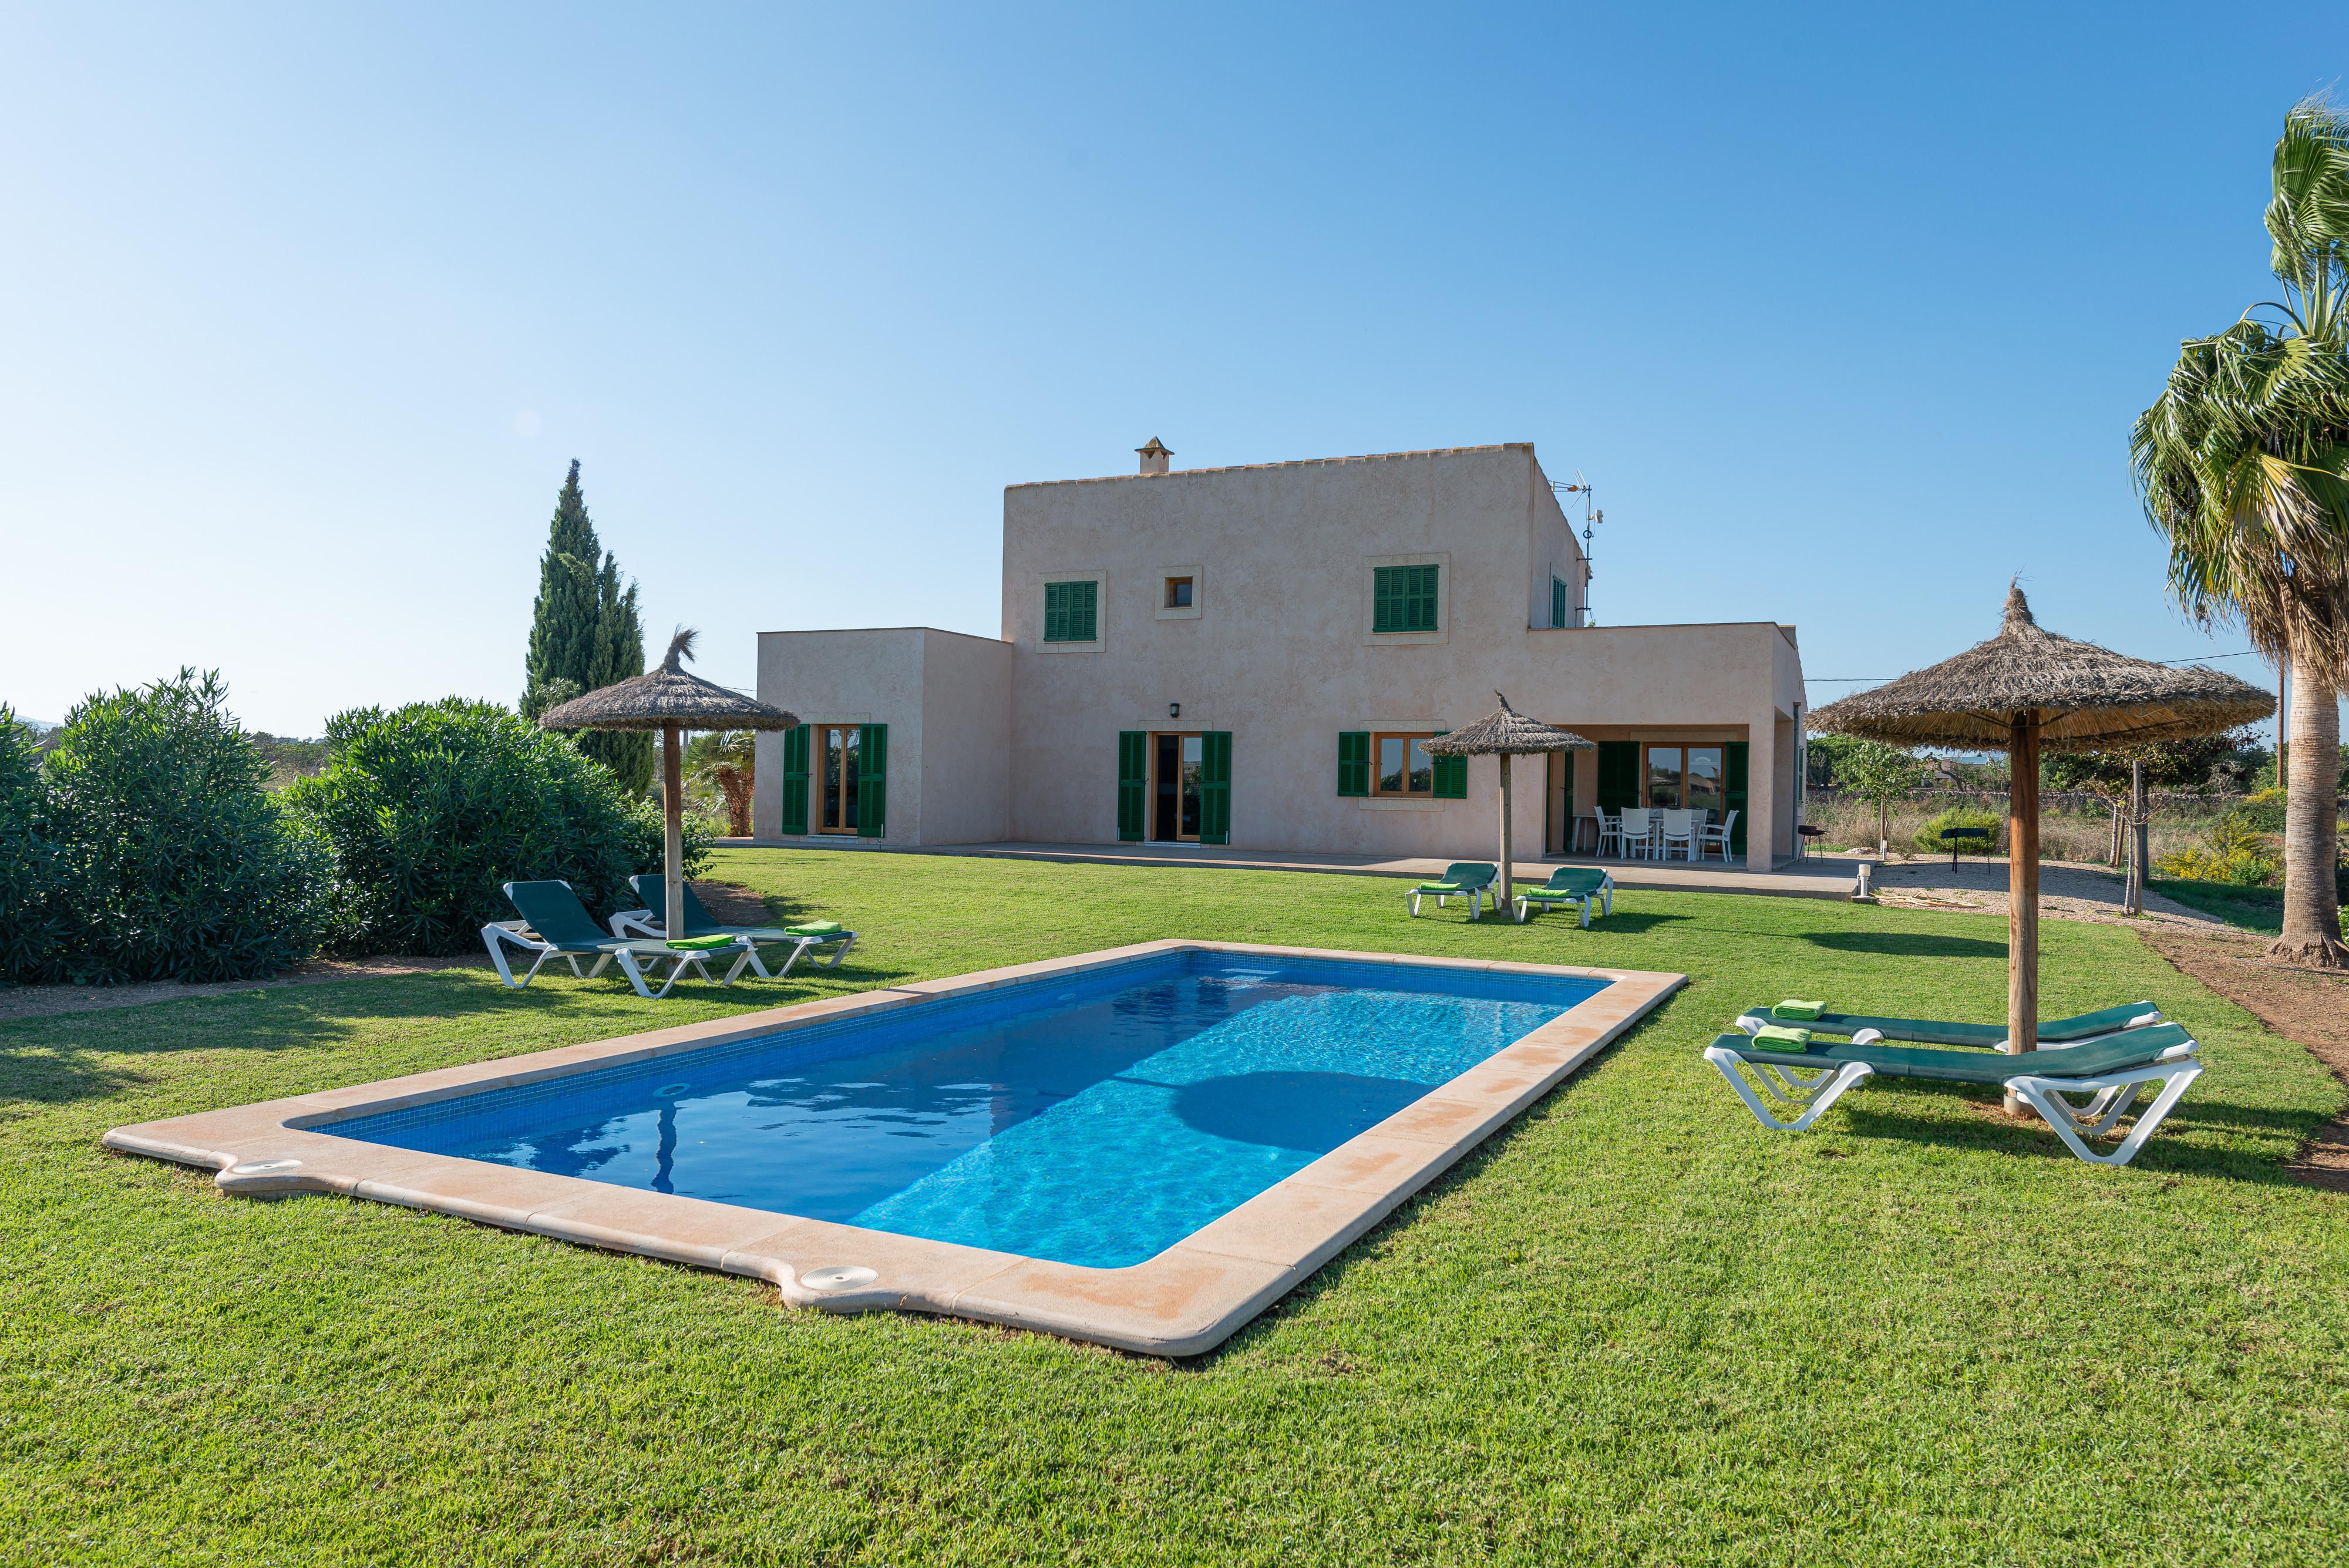 Property Image 2 - SA CARROTJA - Wonderful villa with private pool and free WiFi.